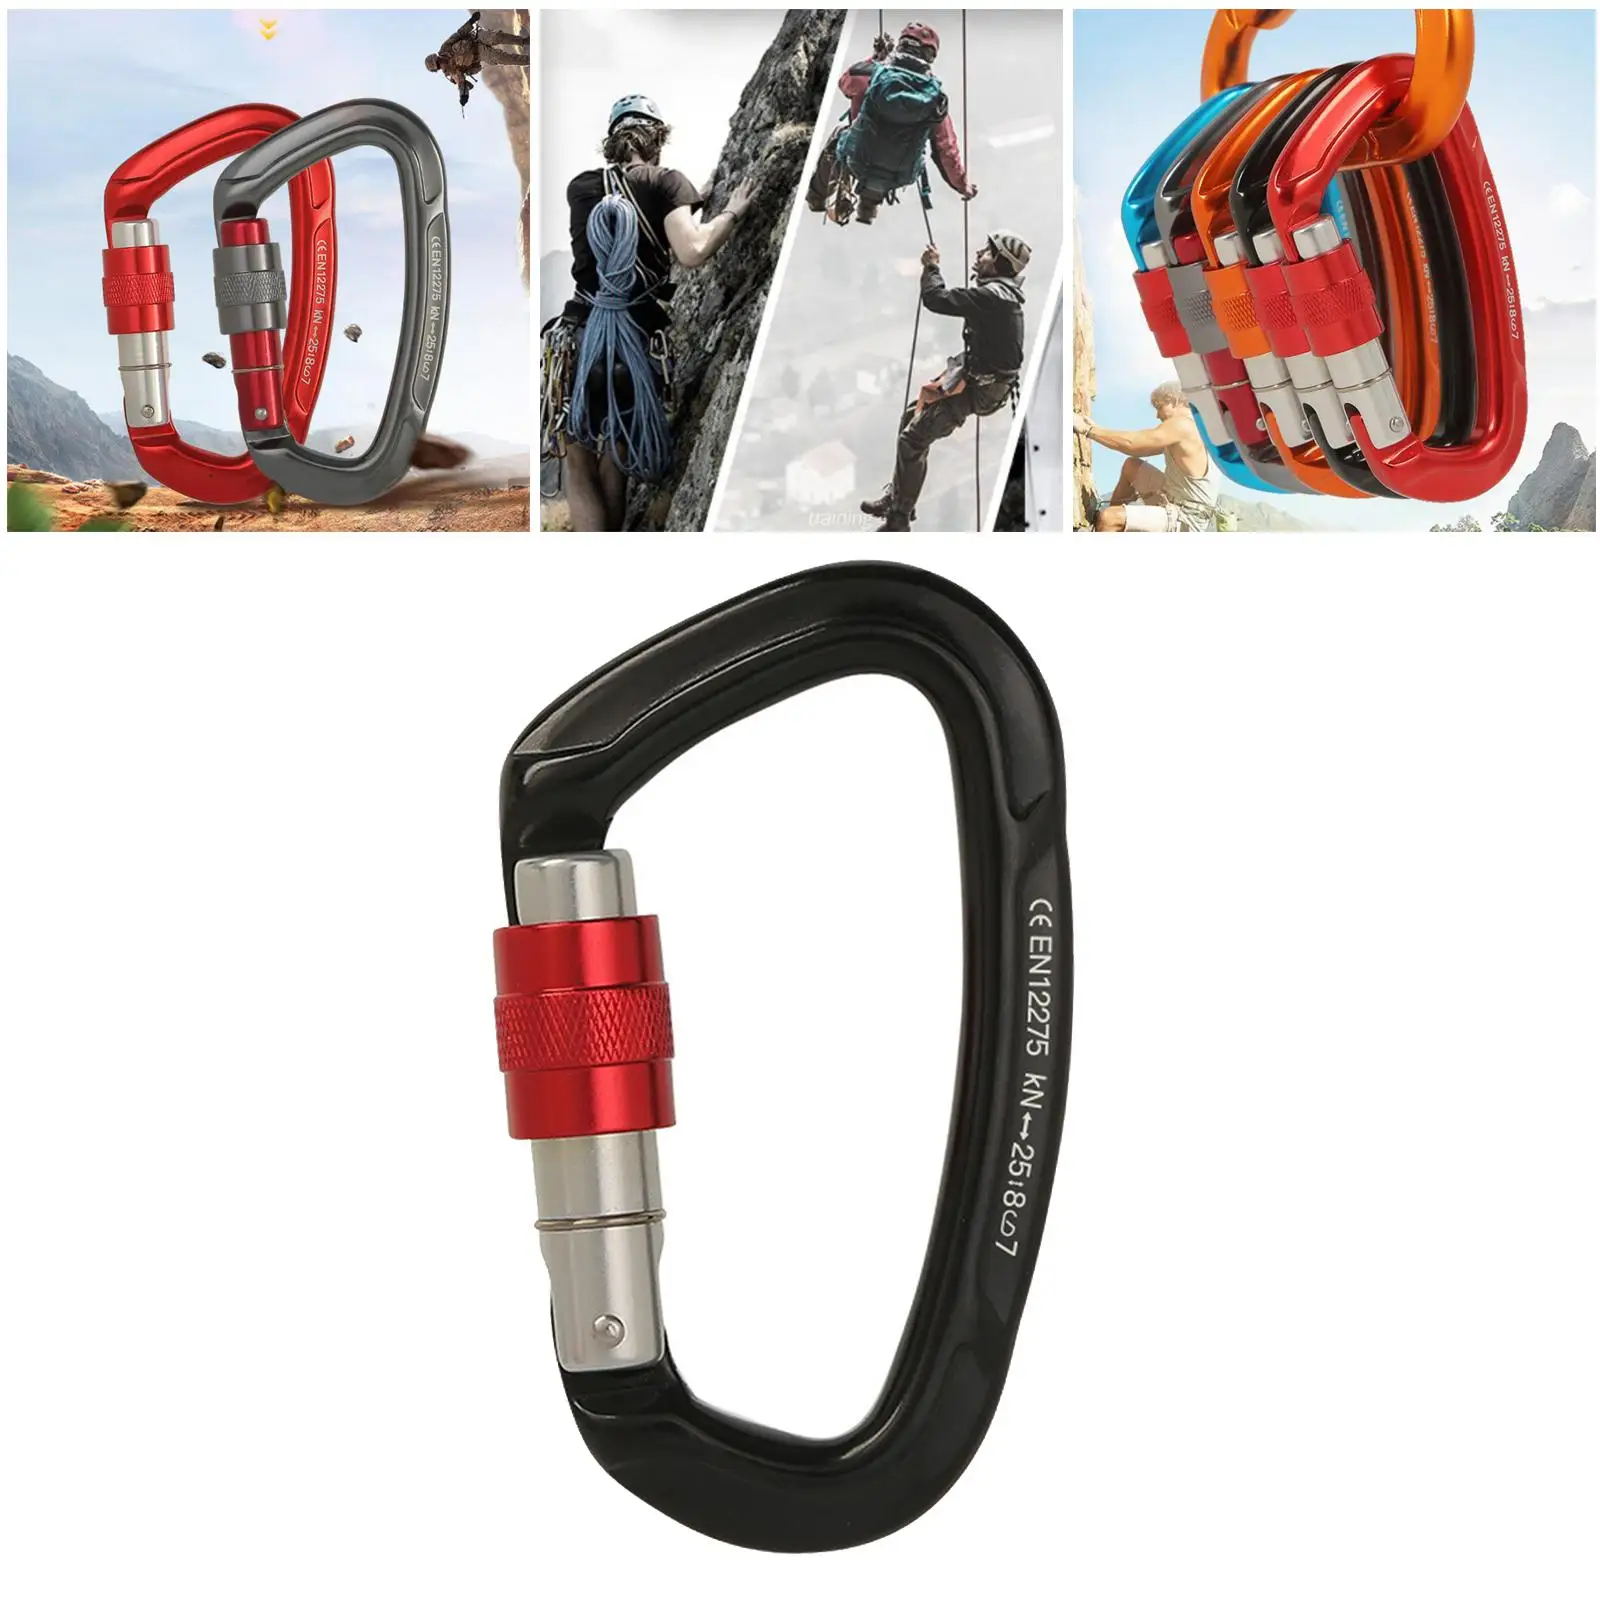 25KN Climbing Carabiner Screwgate Carabiners Rescuing Safety Gear 